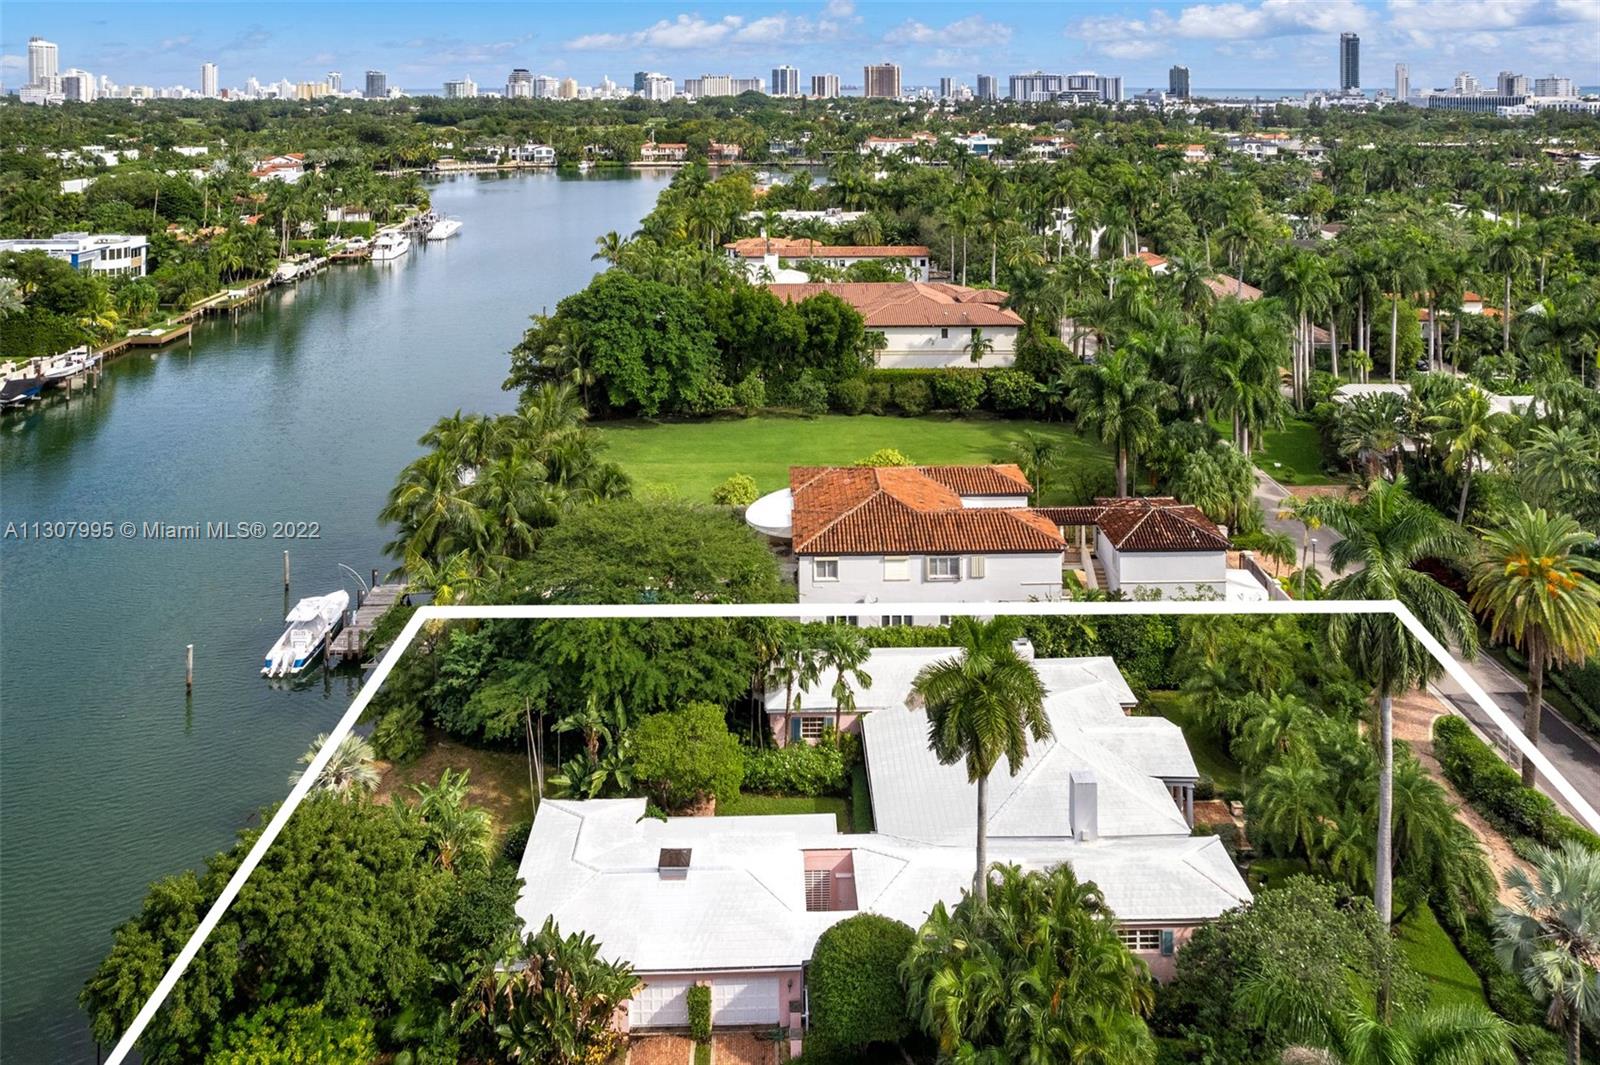 Build your dream home on a waterfront corner lot on coveted Sunset Island II. This 20,000 square foot lot boasts 100’ on the water on one of Miami Beach’s most coveted private island neighborhoods. The existing home is a classic colonial with lushly landscaped exterior, set back entrance, circular driveway and a 2-car garage. Steps away from all that Sunset Harbour has to offer: sunrise yoga at Modo, breakfast at Pura Vida, coffee at Panther and fresh croissants from neighborhood favorite, True Loaf Bakery